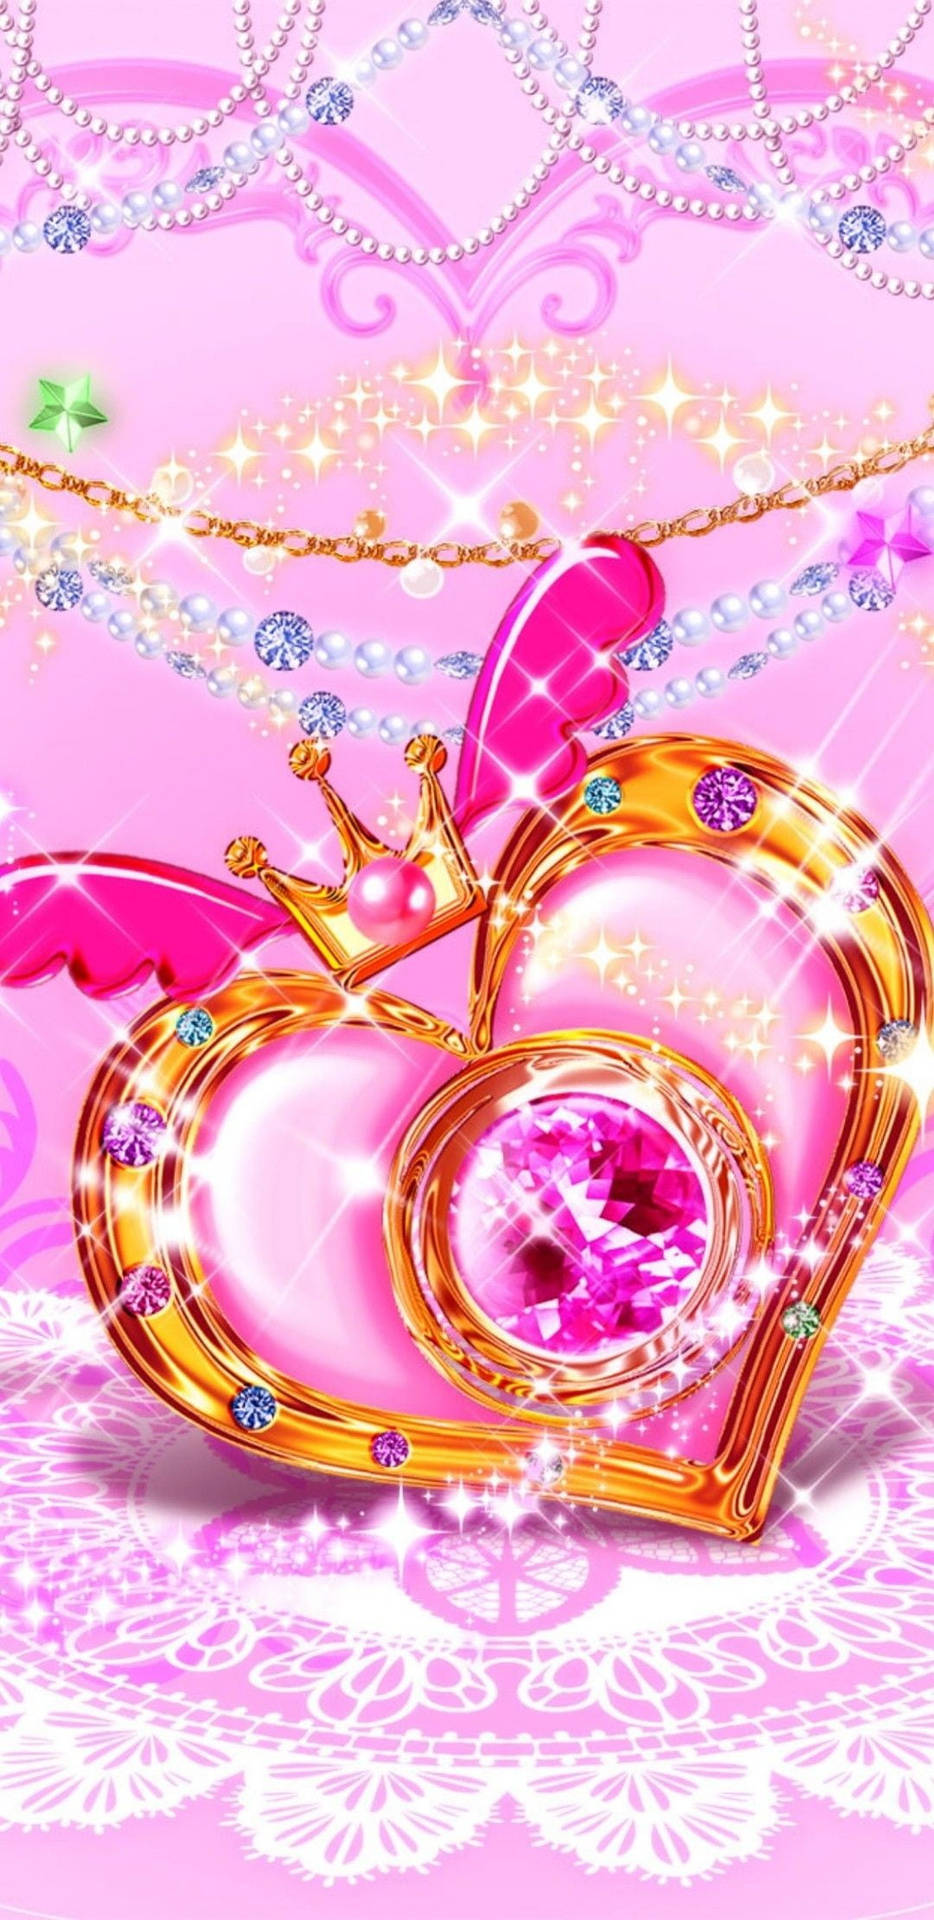 Queen Girly Sparkly Heart Background